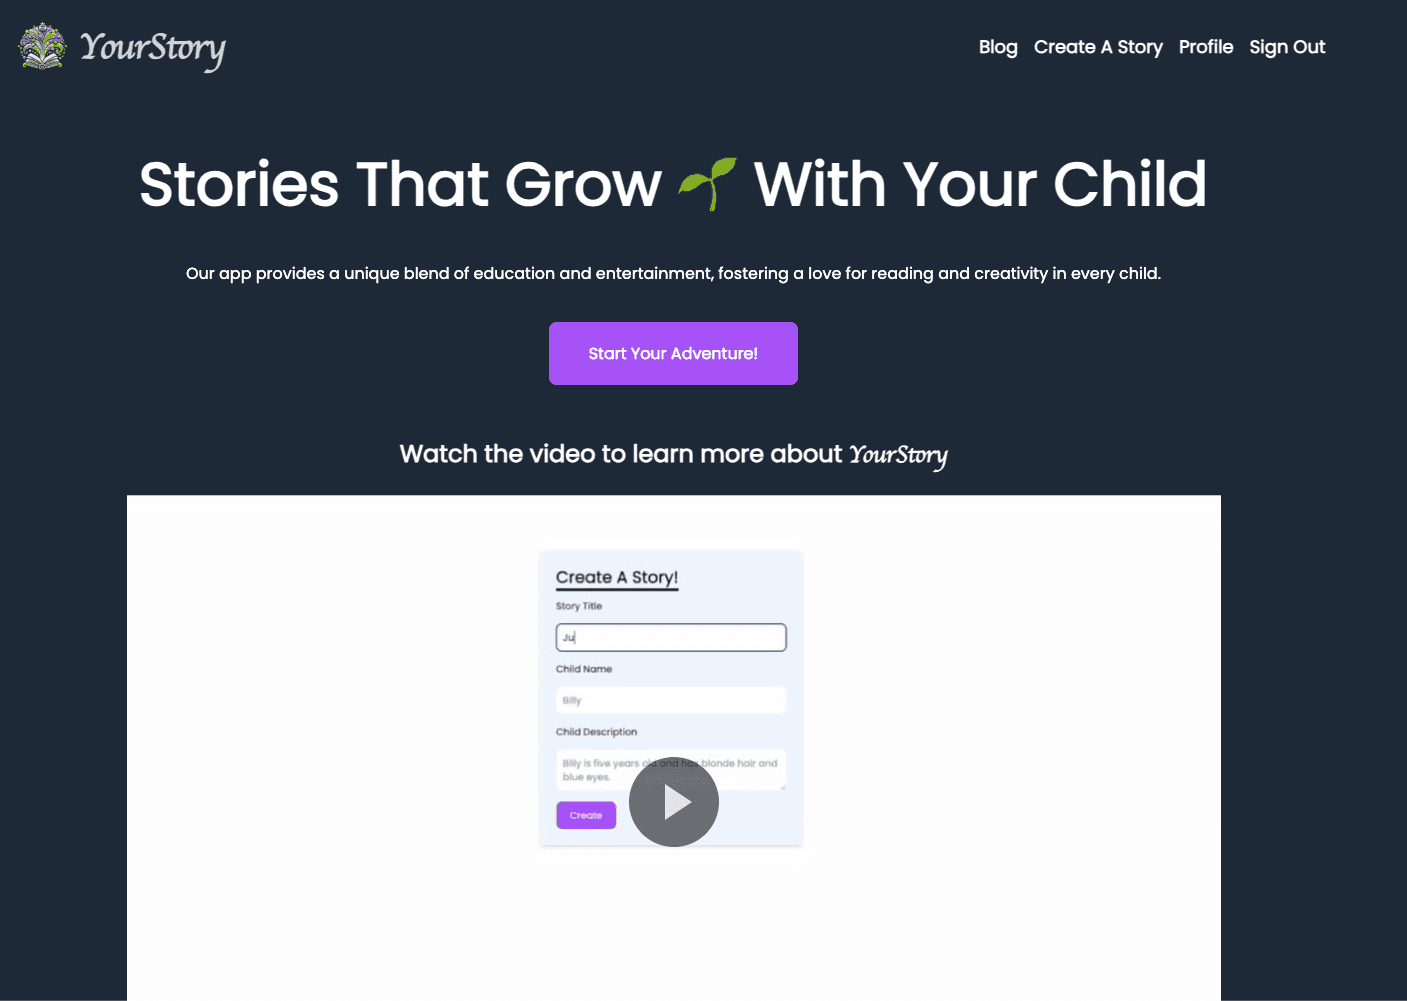 Image of YourStory app